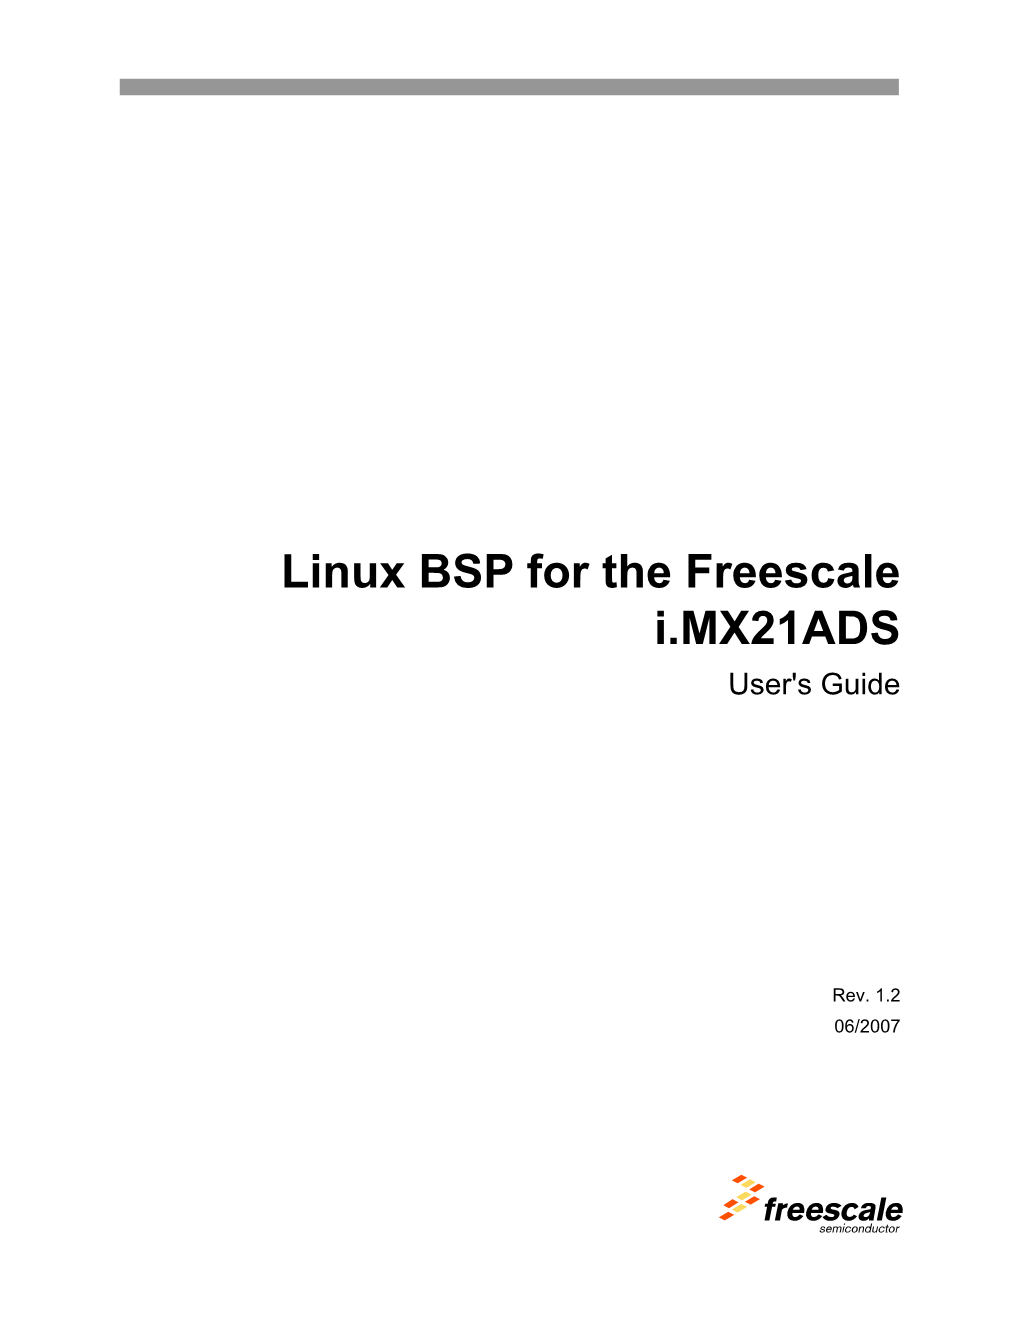 Linux BSP for the Freescale I.MX21ADS User's Guide